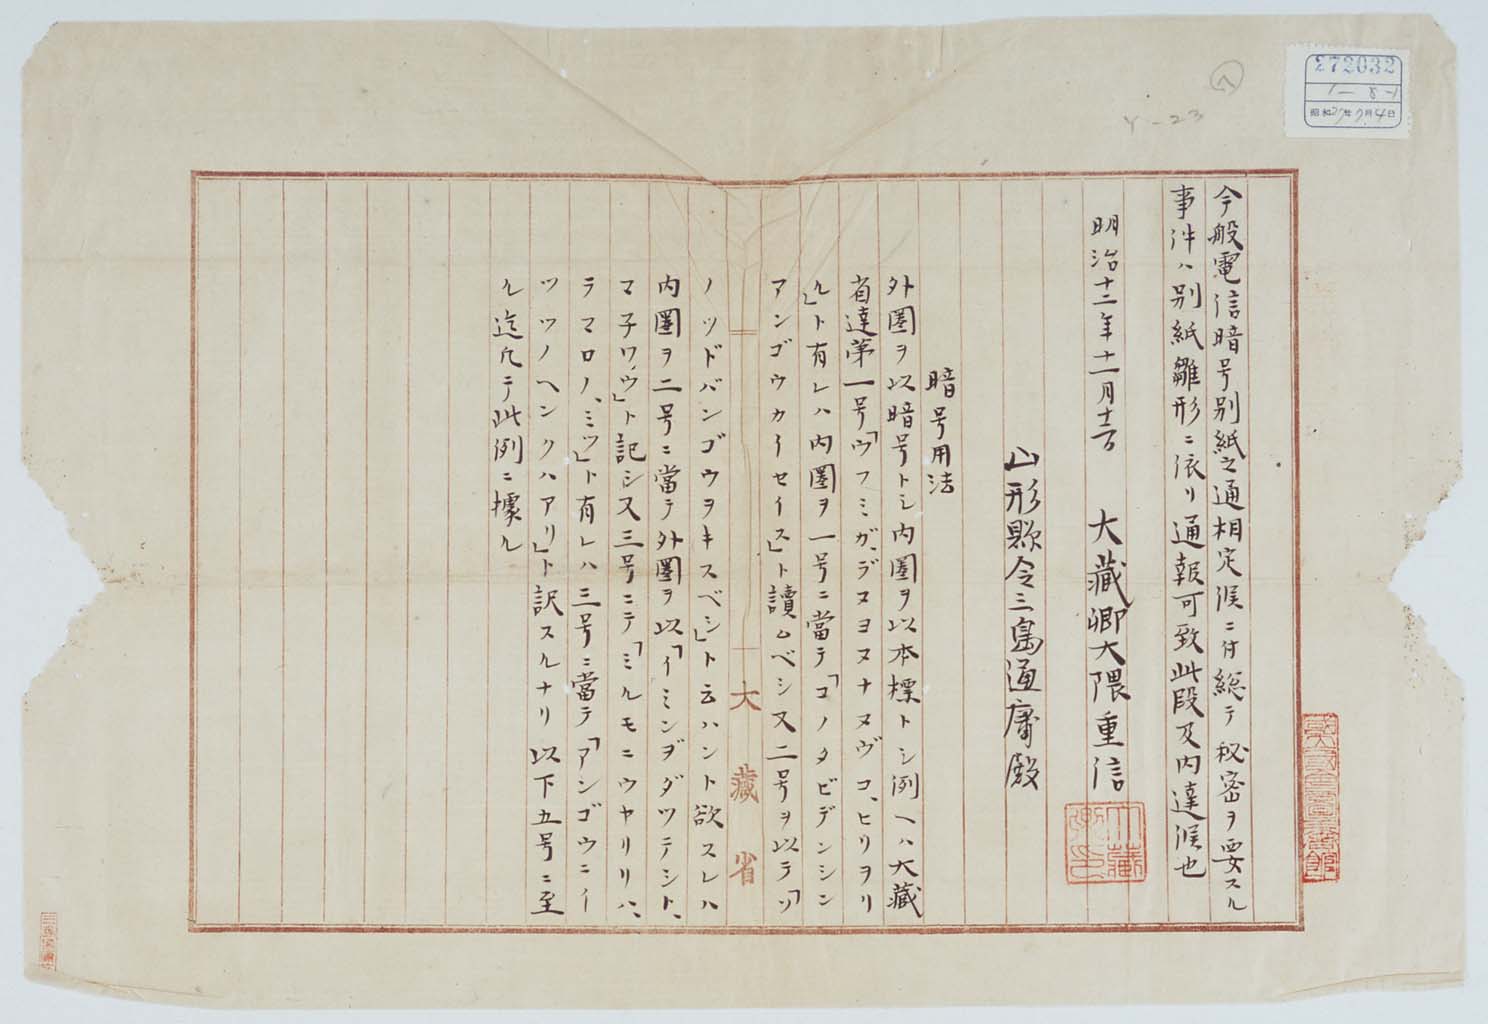 Notification from the Minister of the Treasury (OKUMA Shigenobu) to Prefectures regarding Code Changes, 12 November 1879 (Meiji 12) Papers of MISHIMA Michitsune, #474-10 ( Larger2-2 )